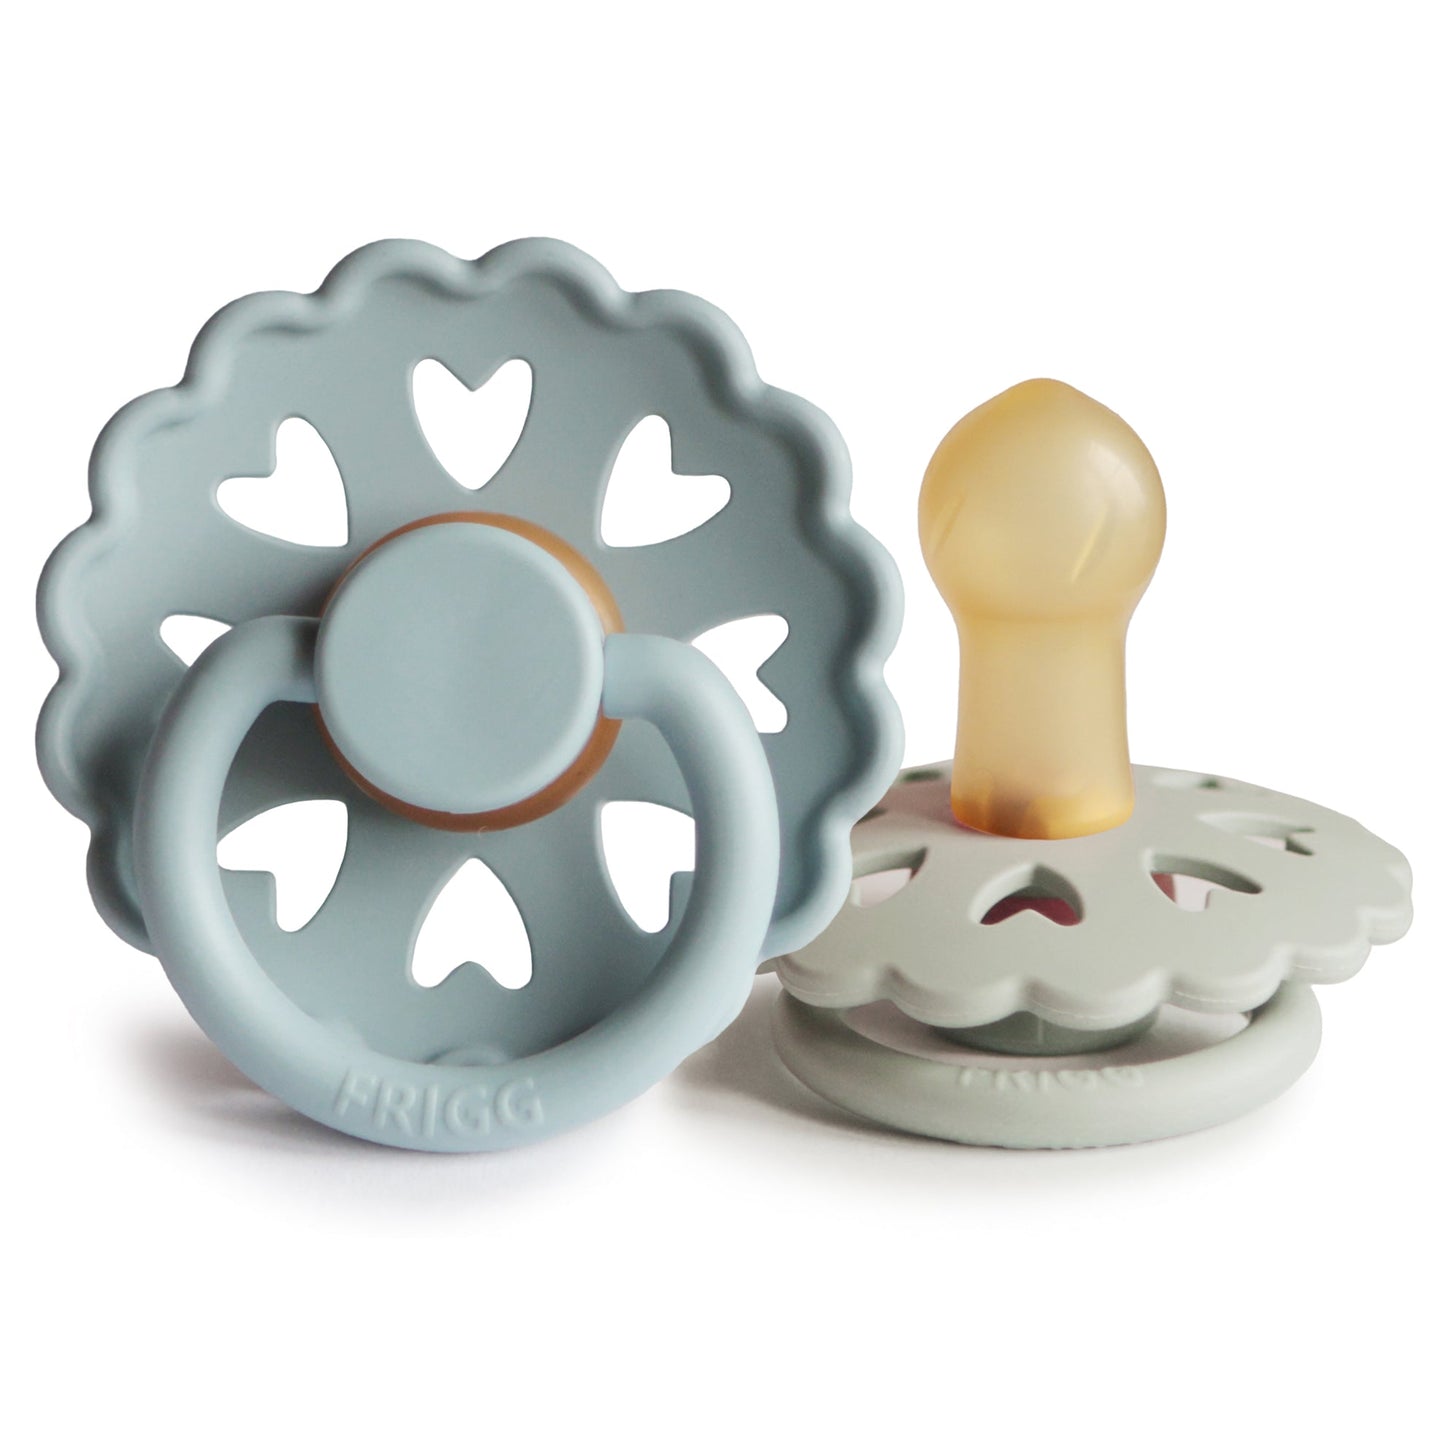 Mushie Frigg Anderson Fairytale Natural Rubber Baby Pacifier - 2 pack